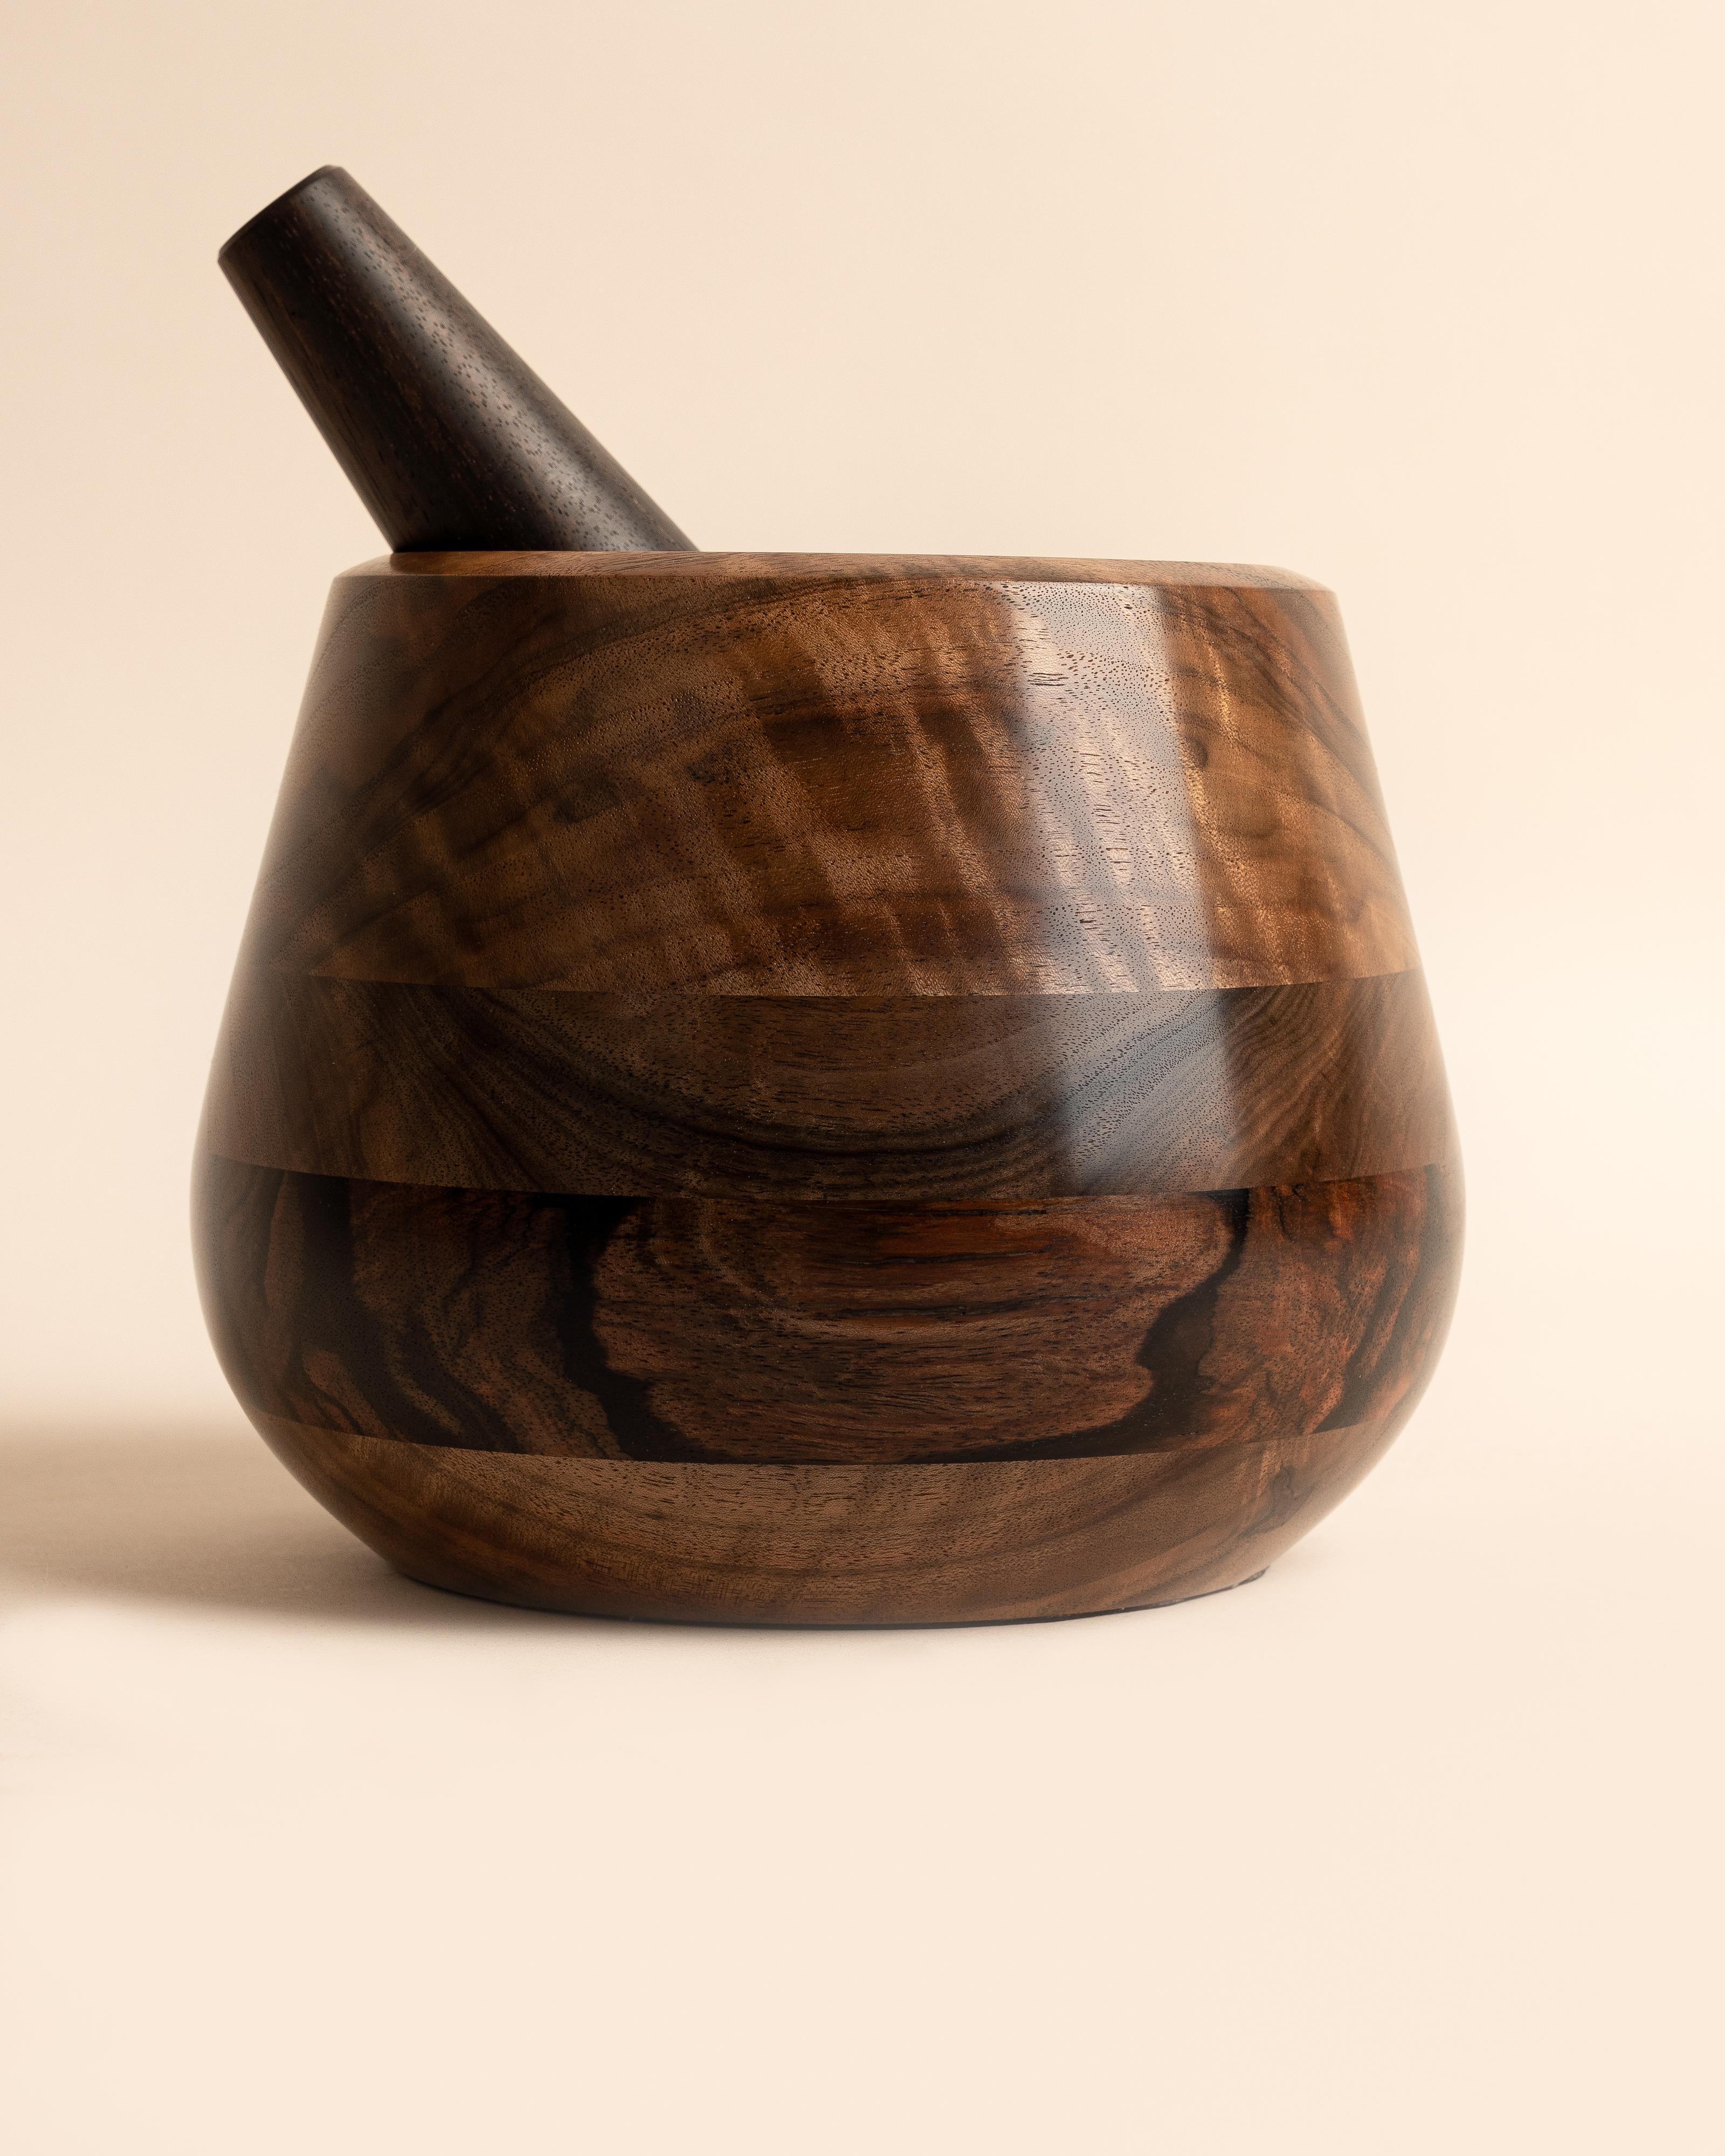 Hand turned mortar features beautifully figured California Claro walnut and Macassar Ebony. The hefty pestle is crafted entirely of Macassar along with the bottom third of the mortar. Ebony is renown for its hard, dense characteristics.